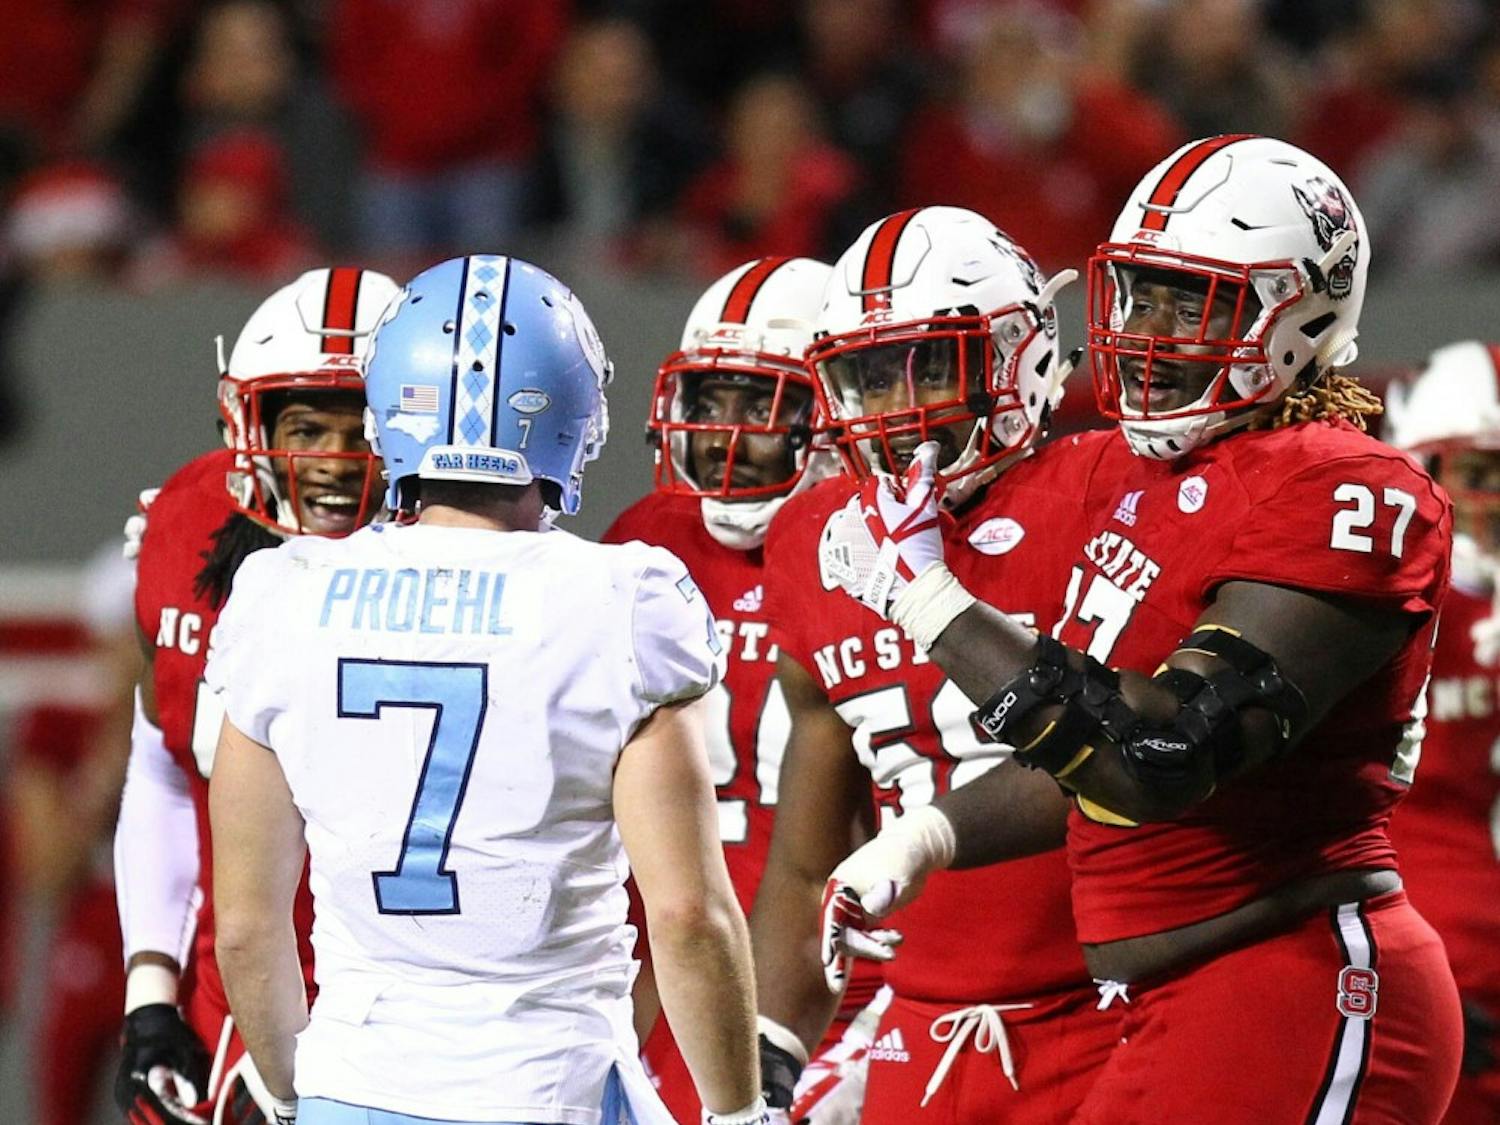 The North Carolina football team lost its season finale to rival N.C. State, 33-21, at Carter-Finley Stadium in Raleigh. UNC ended the season at 3-9, its worst record since 2006. In the loss, wide receiver Anthony Ratliff-Williams had a career-high 131 receiving yards and quarterback Nathan Elliott threw three touchdowns and two interceptions.